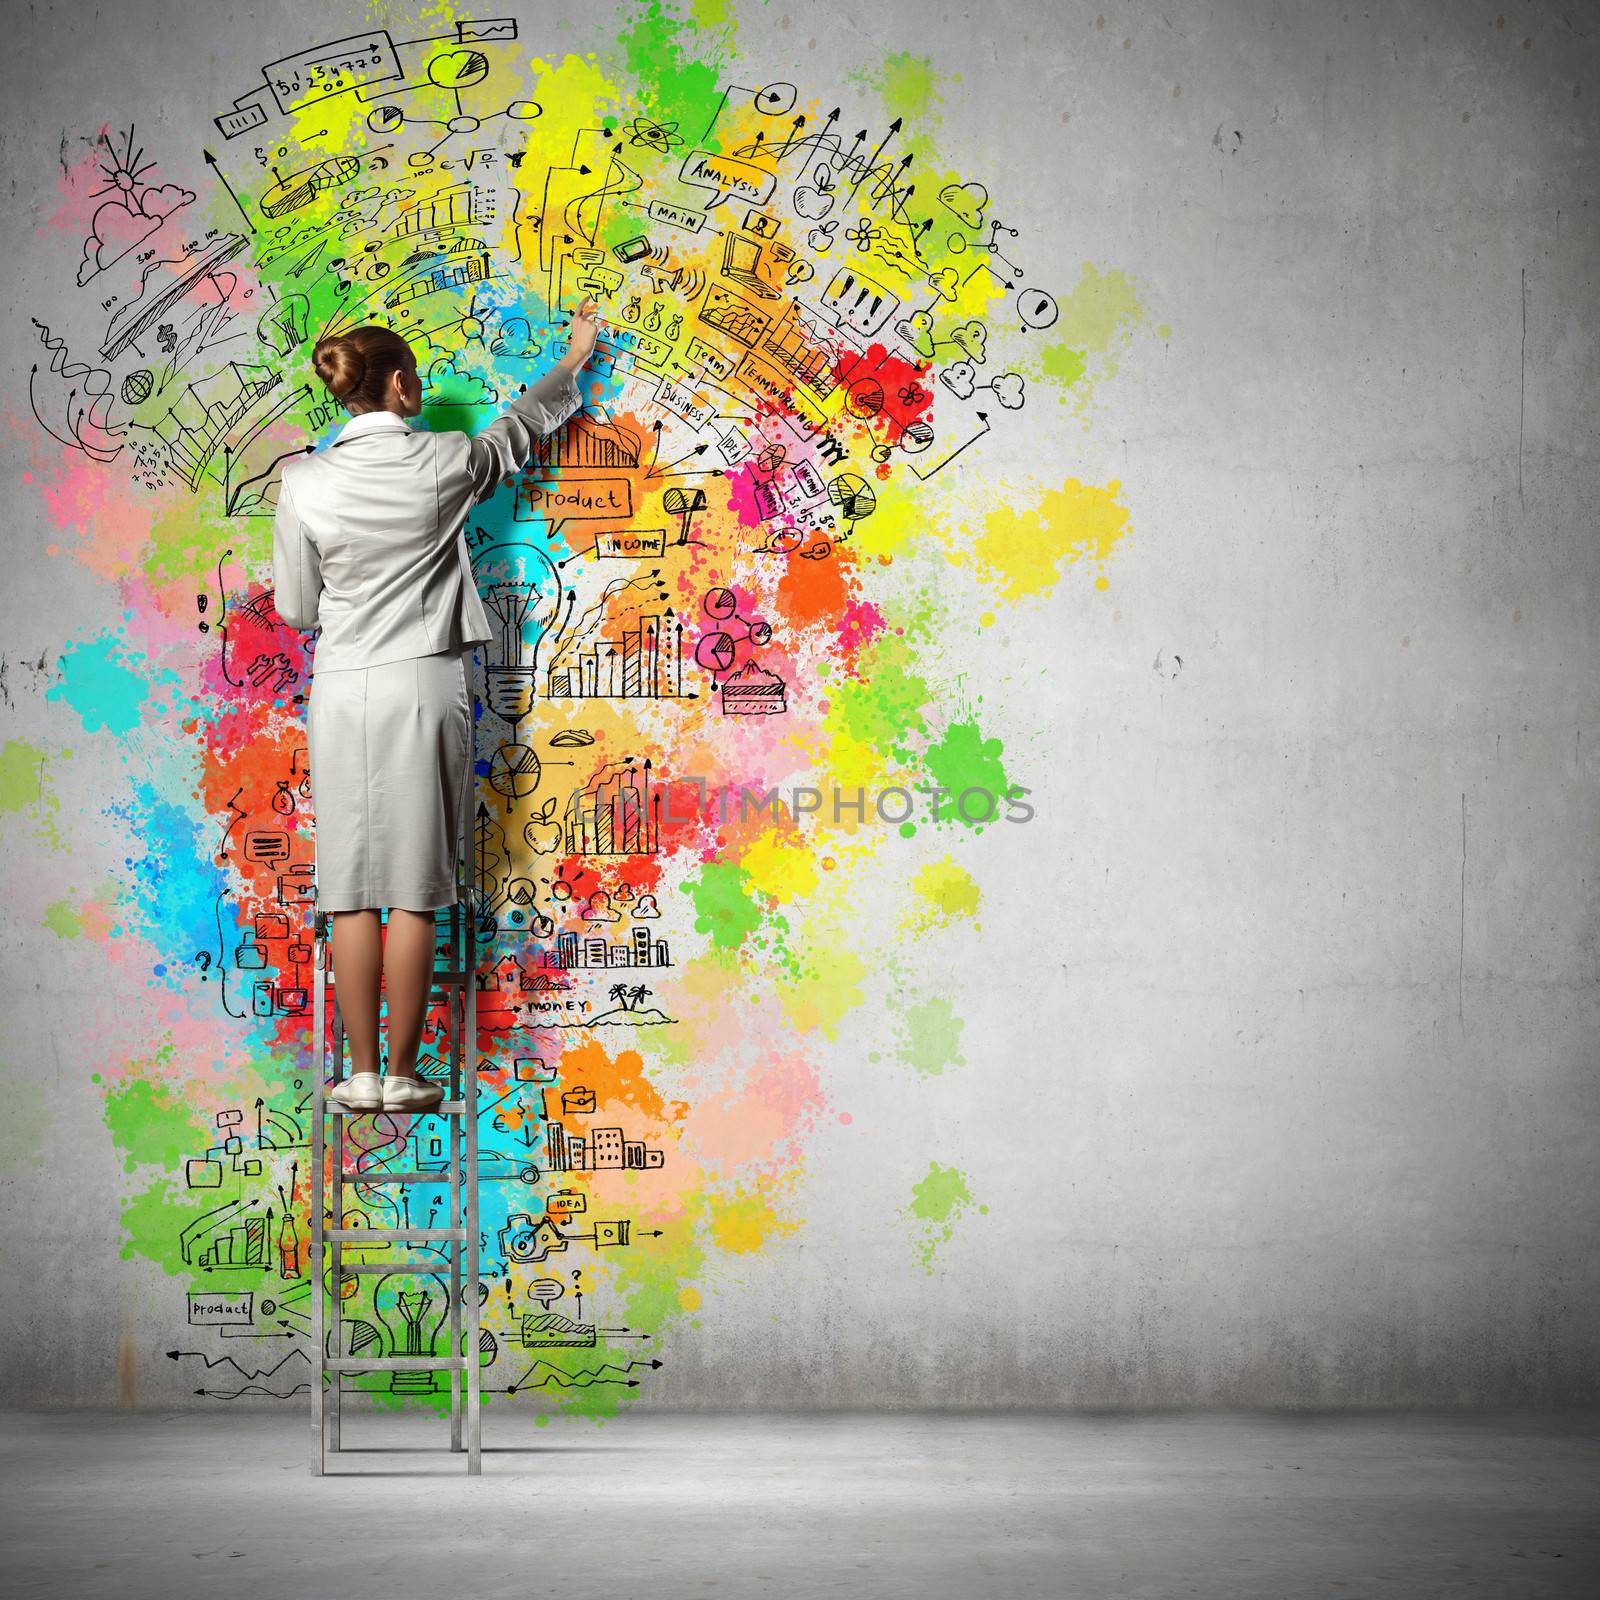 Back view of businesswoman drawing colorful business ideas on wall